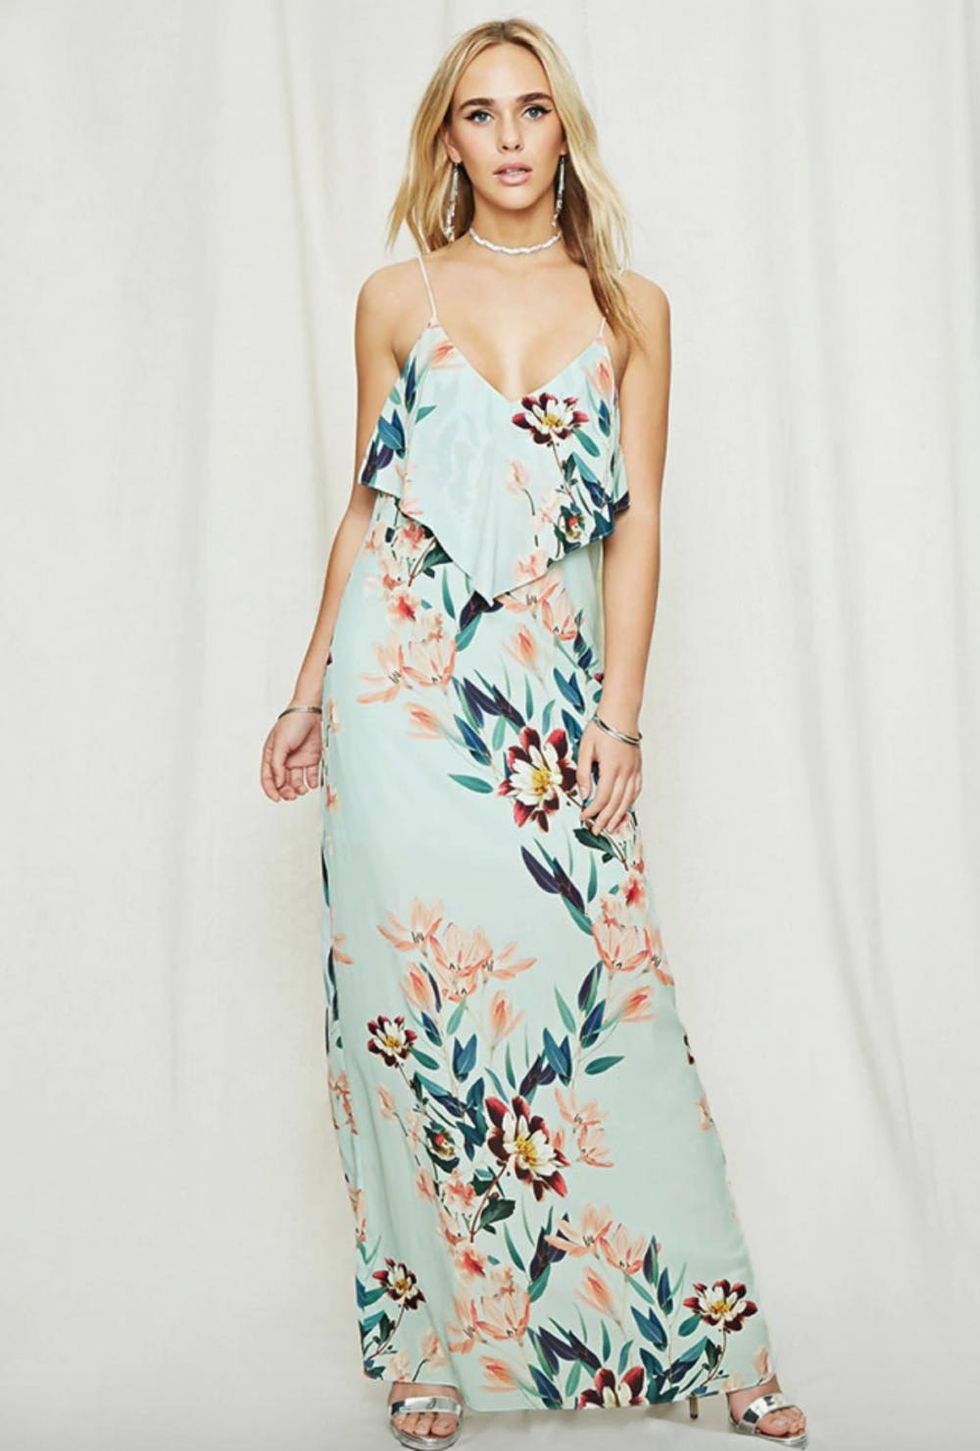 Forever 21’s Debut Bridesmaid Dress Collection Is All Under $100 - Brit ...